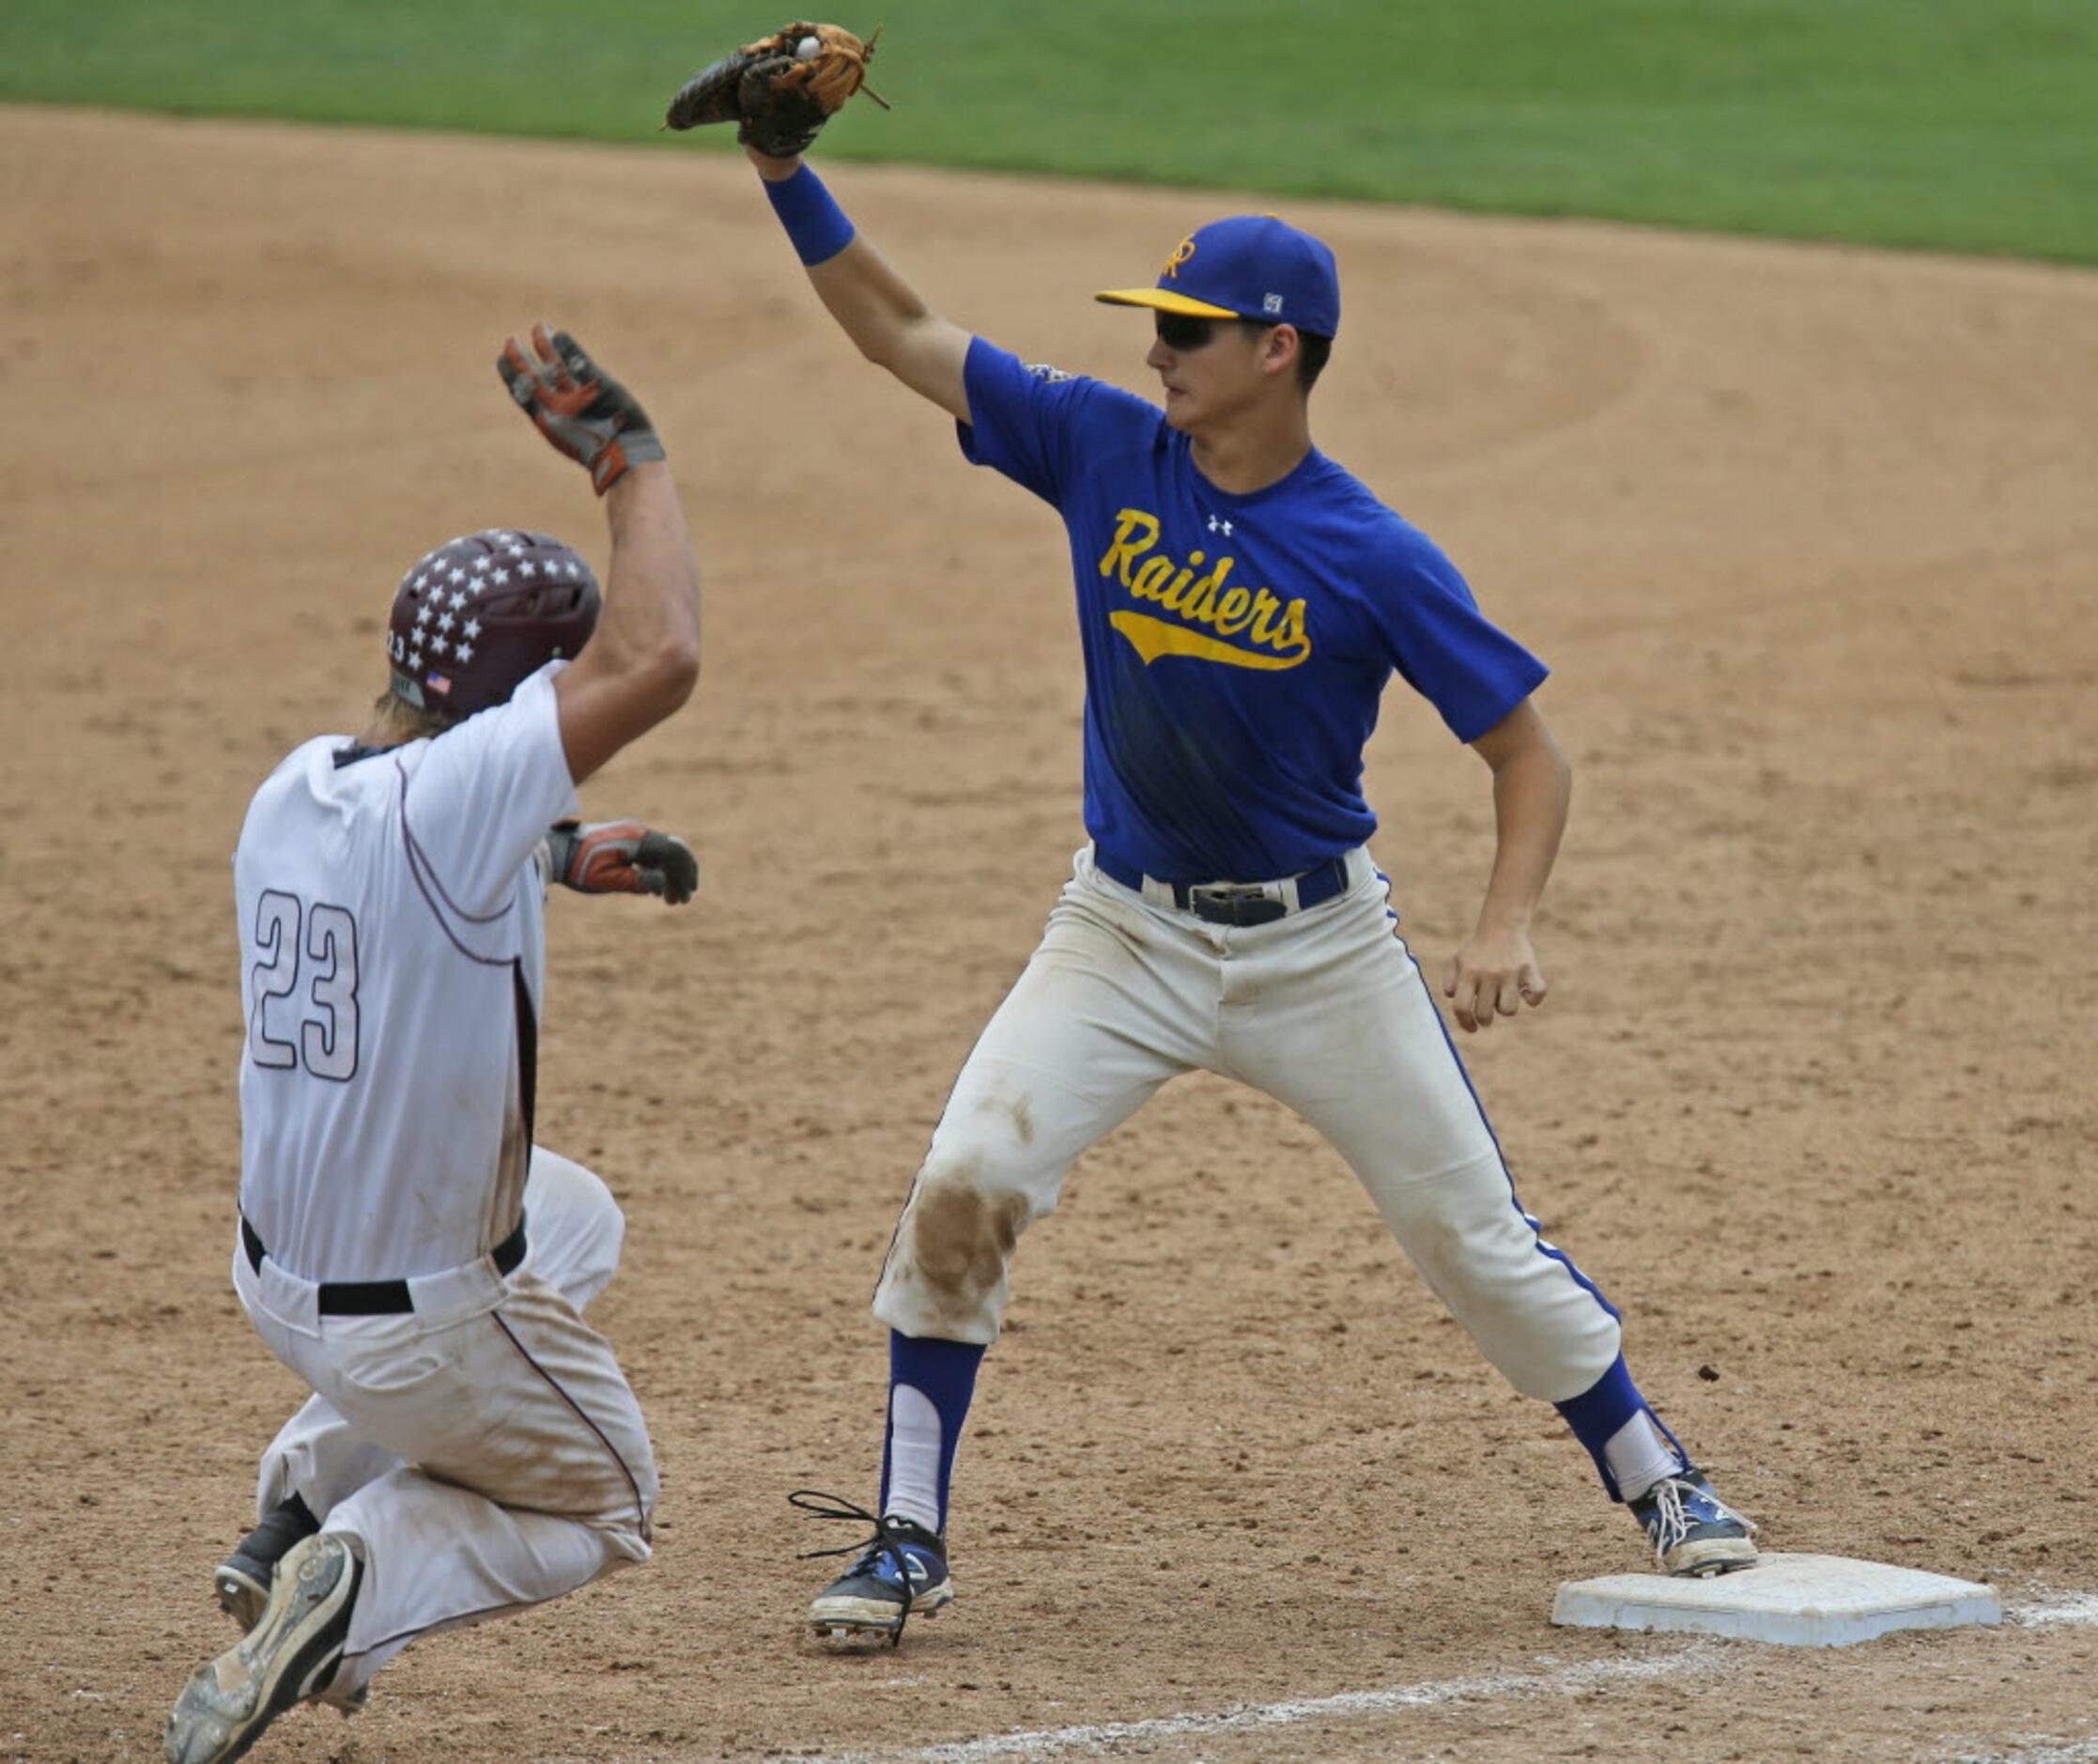 Sunnyvale first baseman Jake Wilcox makes the putout at first base as Troy's Kyle Whitley is...